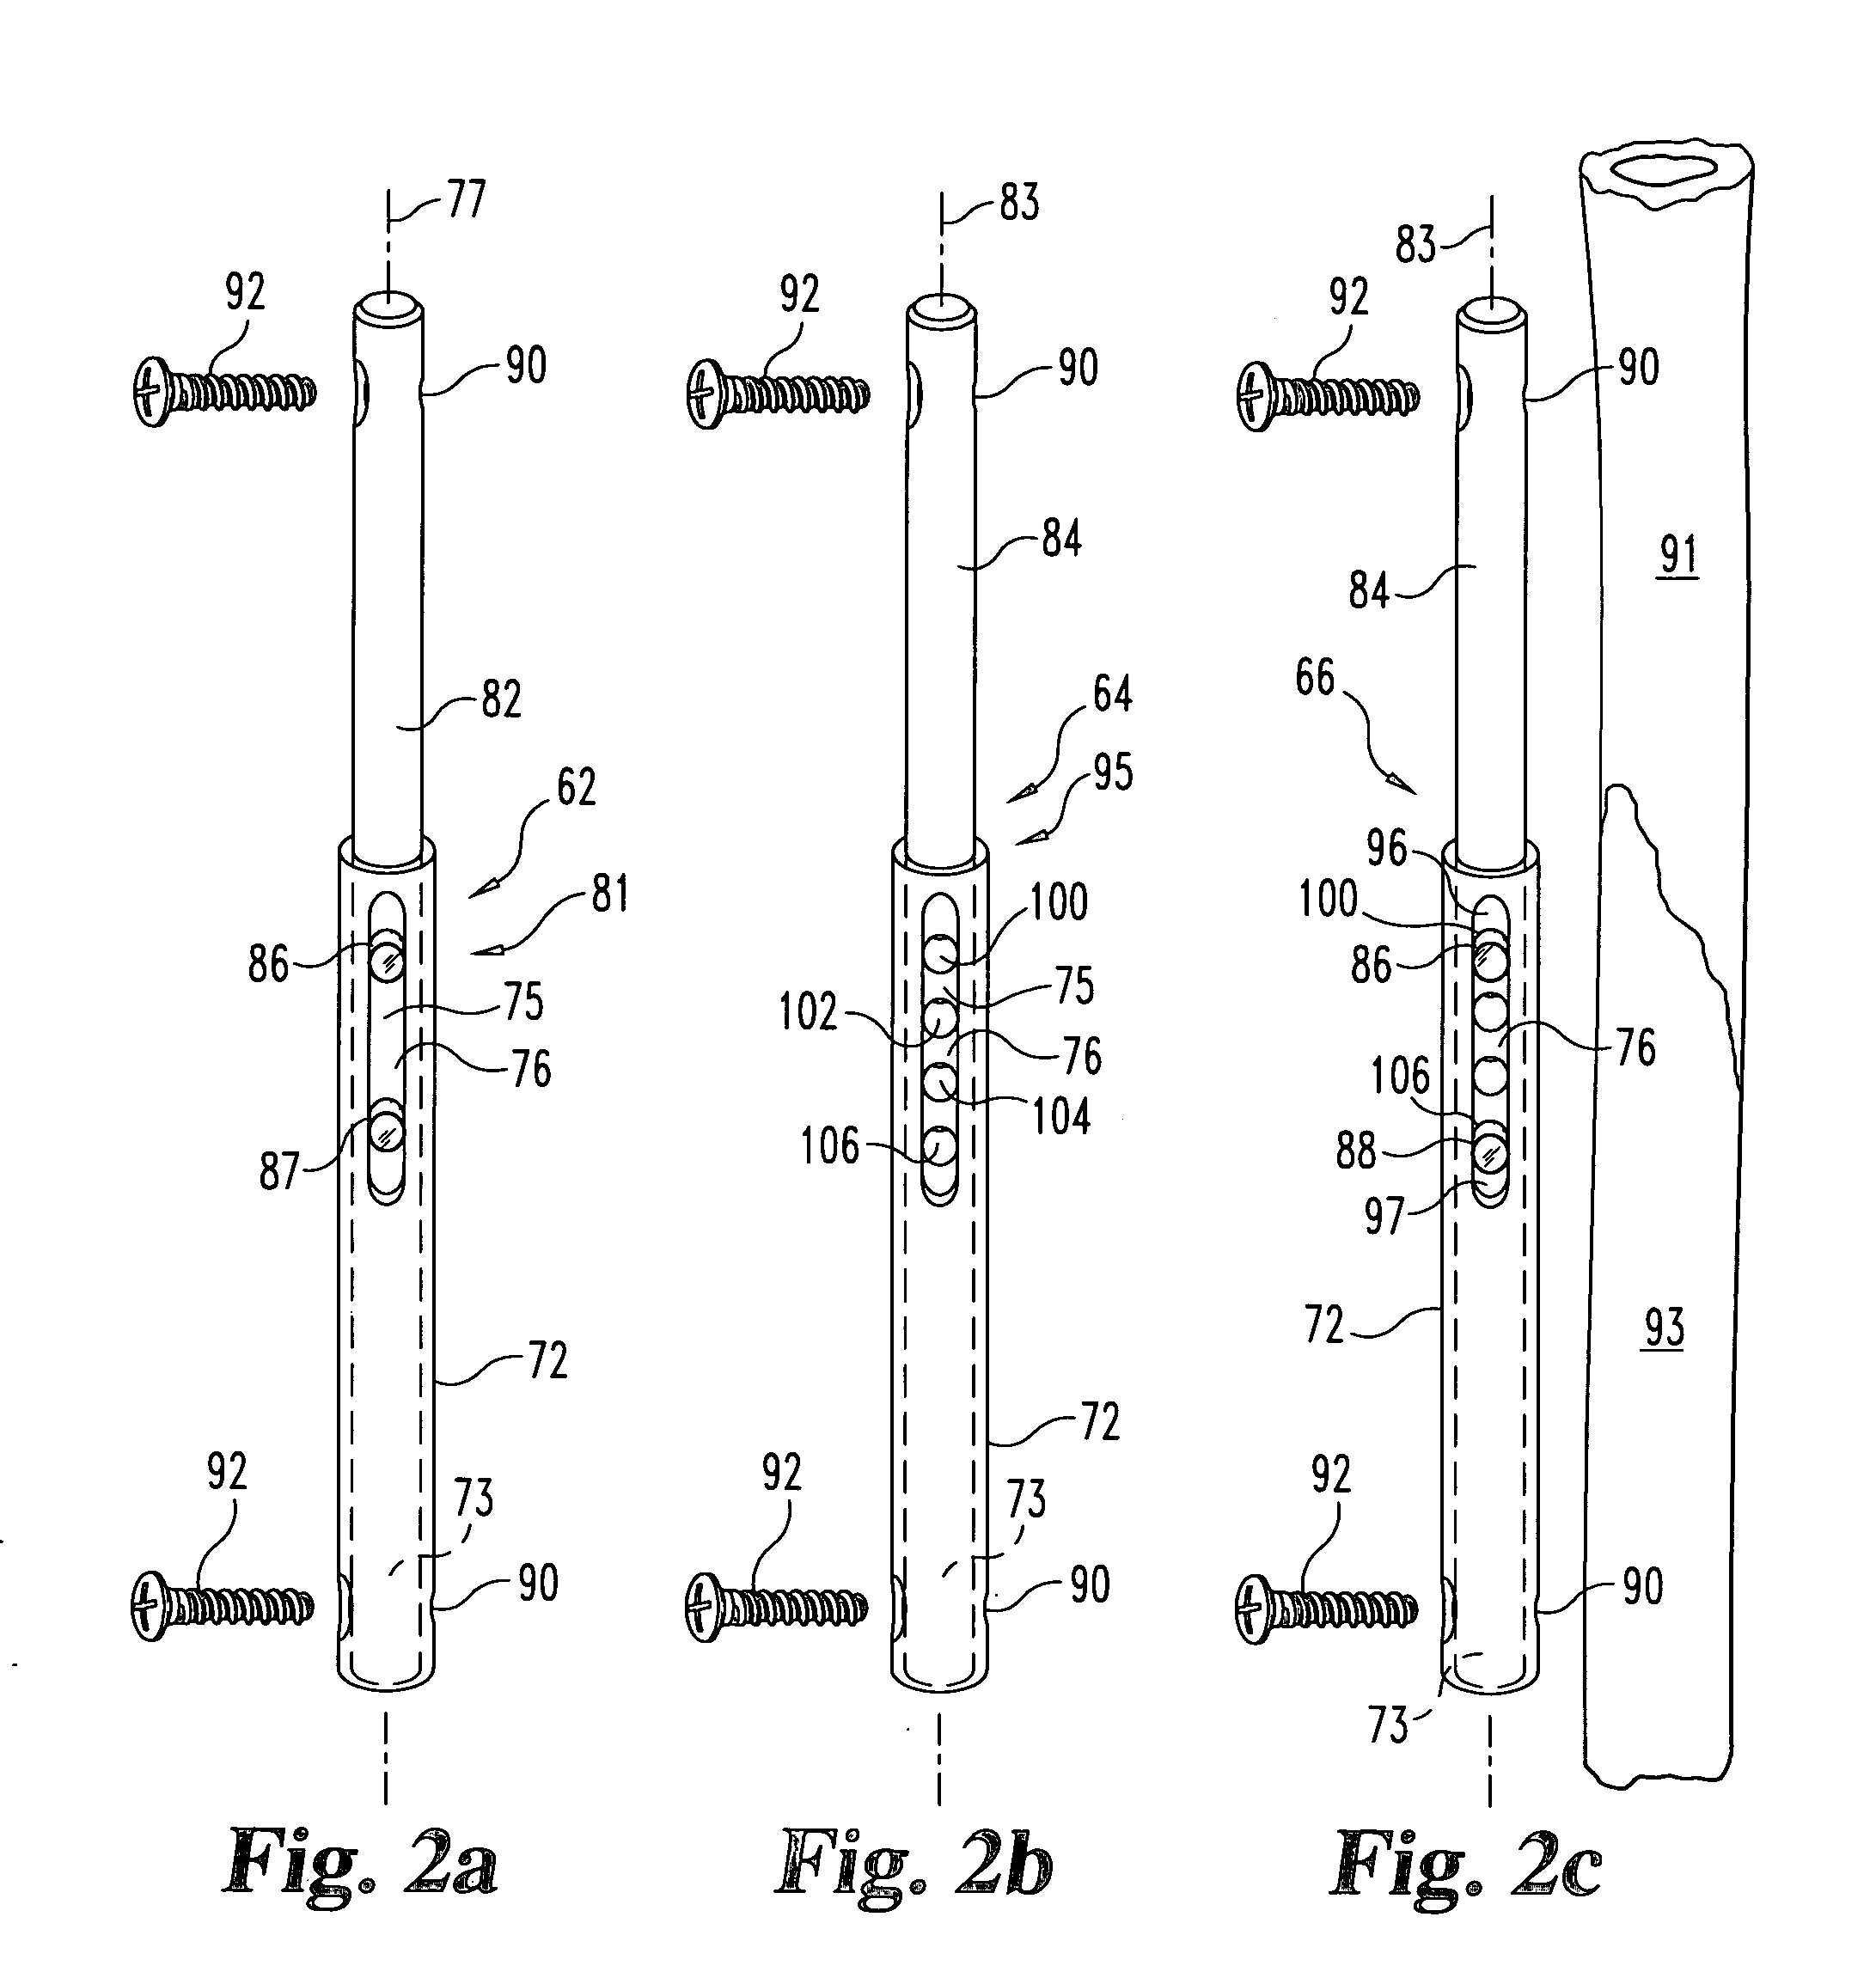 Apparatus and method for providing dynamizable translations to orthopedic implants